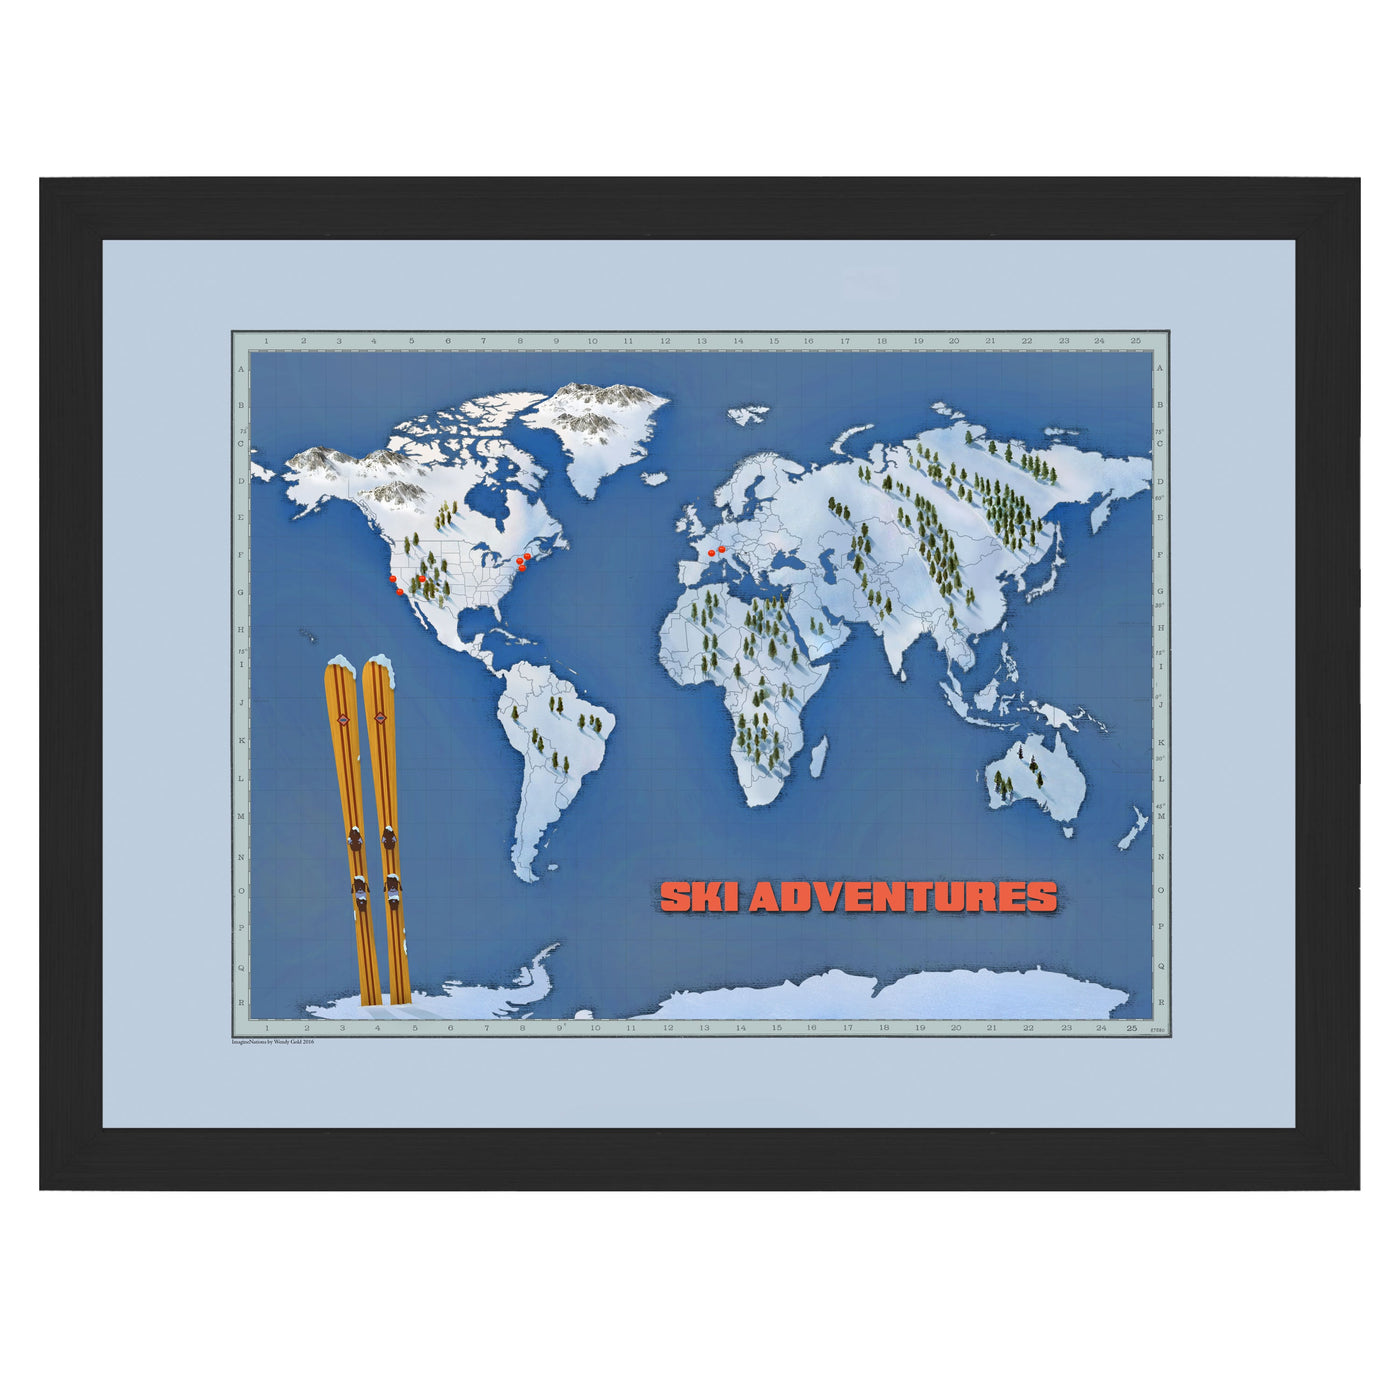 Winter Adventures World Map with Pins un-customized